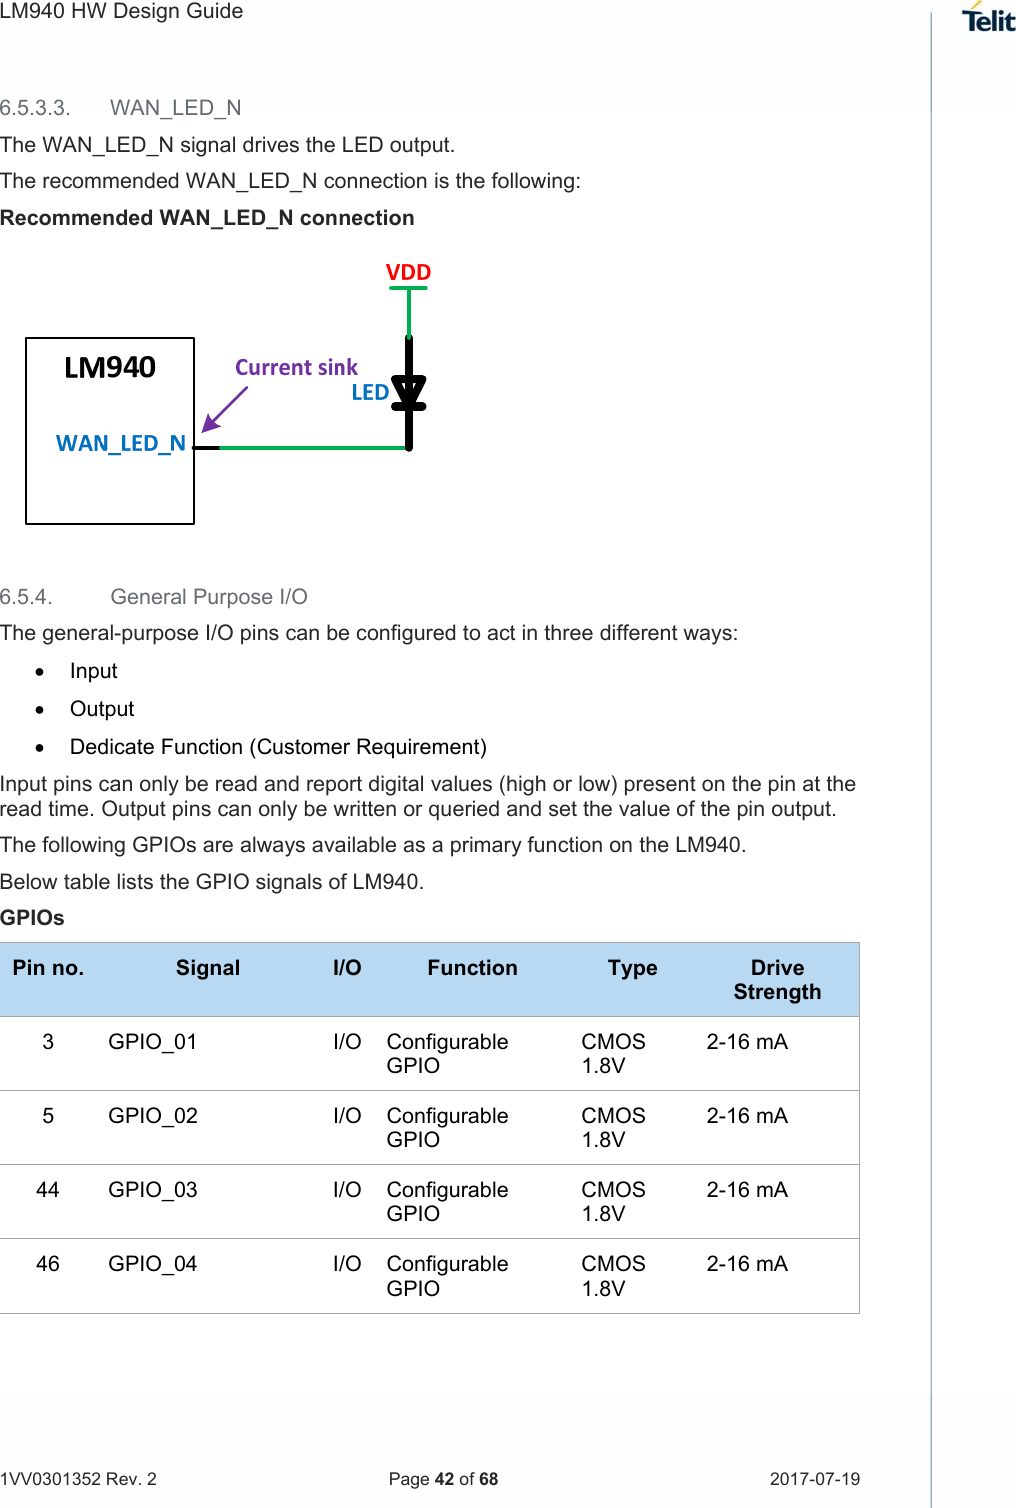 LM940 HW Design Guide   1VV0301352 Rev. 2   Page 42 of 68  2017-07-19  6.5.3.3.  WAN_LED_N The WAN_LED_N signal drives the LED output. The recommended WAN_LED_N connection is the following: Recommended WAN_LED_N connection   6.5.4.  General Purpose I/O The general-purpose I/O pins can be configured to act in three different ways:   Input   Output   Dedicate Function (Customer Requirement) Input pins can only be read and report digital values (high or low) present on the pin at the read time. Output pins can only be written or queried and set the value of the pin output.  The following GPIOs are always available as a primary function on the LM940. Below table lists the GPIO signals of LM940. GPIOs Pin no.  Signal  I/O  Function  Type  Drive Strength 3  GPIO_01  I/O  Configurable GPIO CMOS 1.8V 2-16 mA 5  GPIO_02  I/O  Configurable GPIO CMOS 1.8V 2-16 mA 44  GPIO_03   I/O  Configurable GPIO CMOS 1.8V 2-16 mA 46  GPIO_04  I/O  Configurable GPIO CMOS 1.8V 2-16 mA   